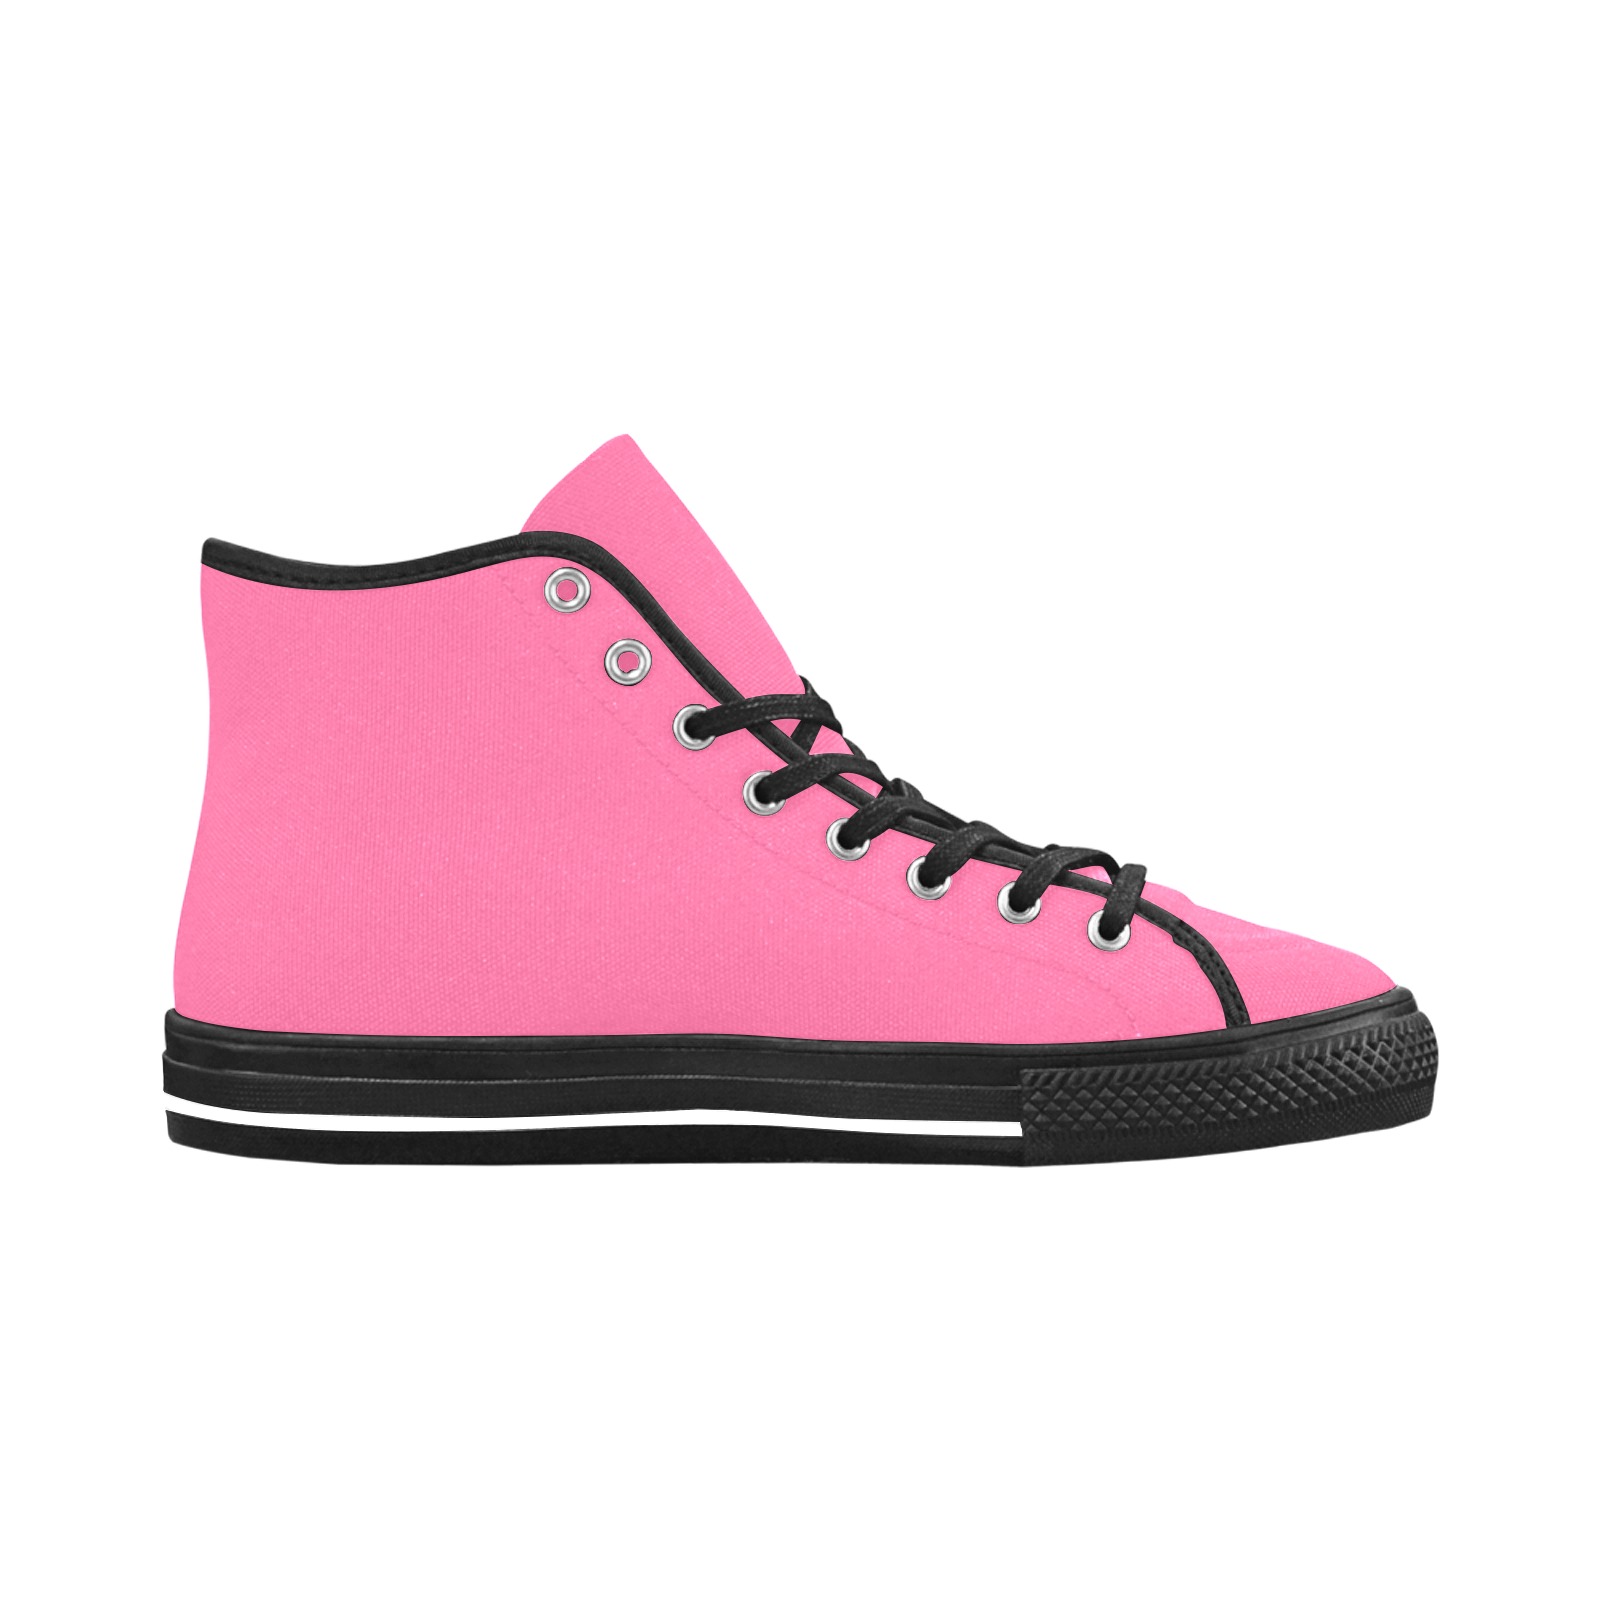 color French pink Vancouver H Women's Canvas Shoes (1013-1)